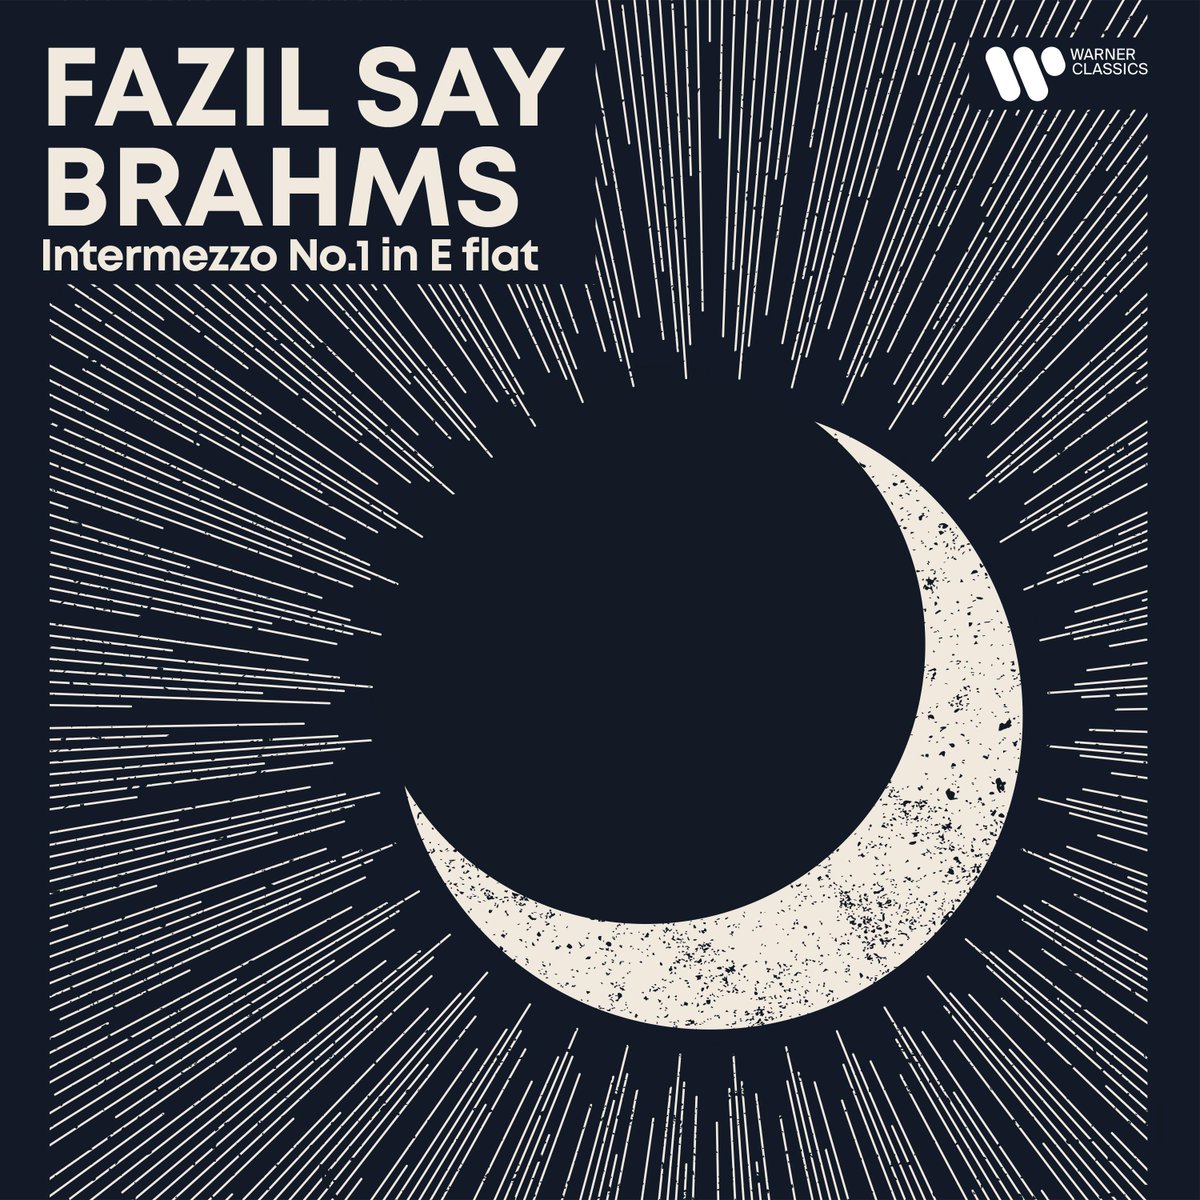 Brahms’s contemplative Intermezzo No.1 in E flat Op.117/1 combines sweet melodies, unexpected harmonies and a reassuring lilt. This track completes @fazilsaymusic’s album of piano music inspired by the evening, also out today. 🎧 w.lnk.to/evening